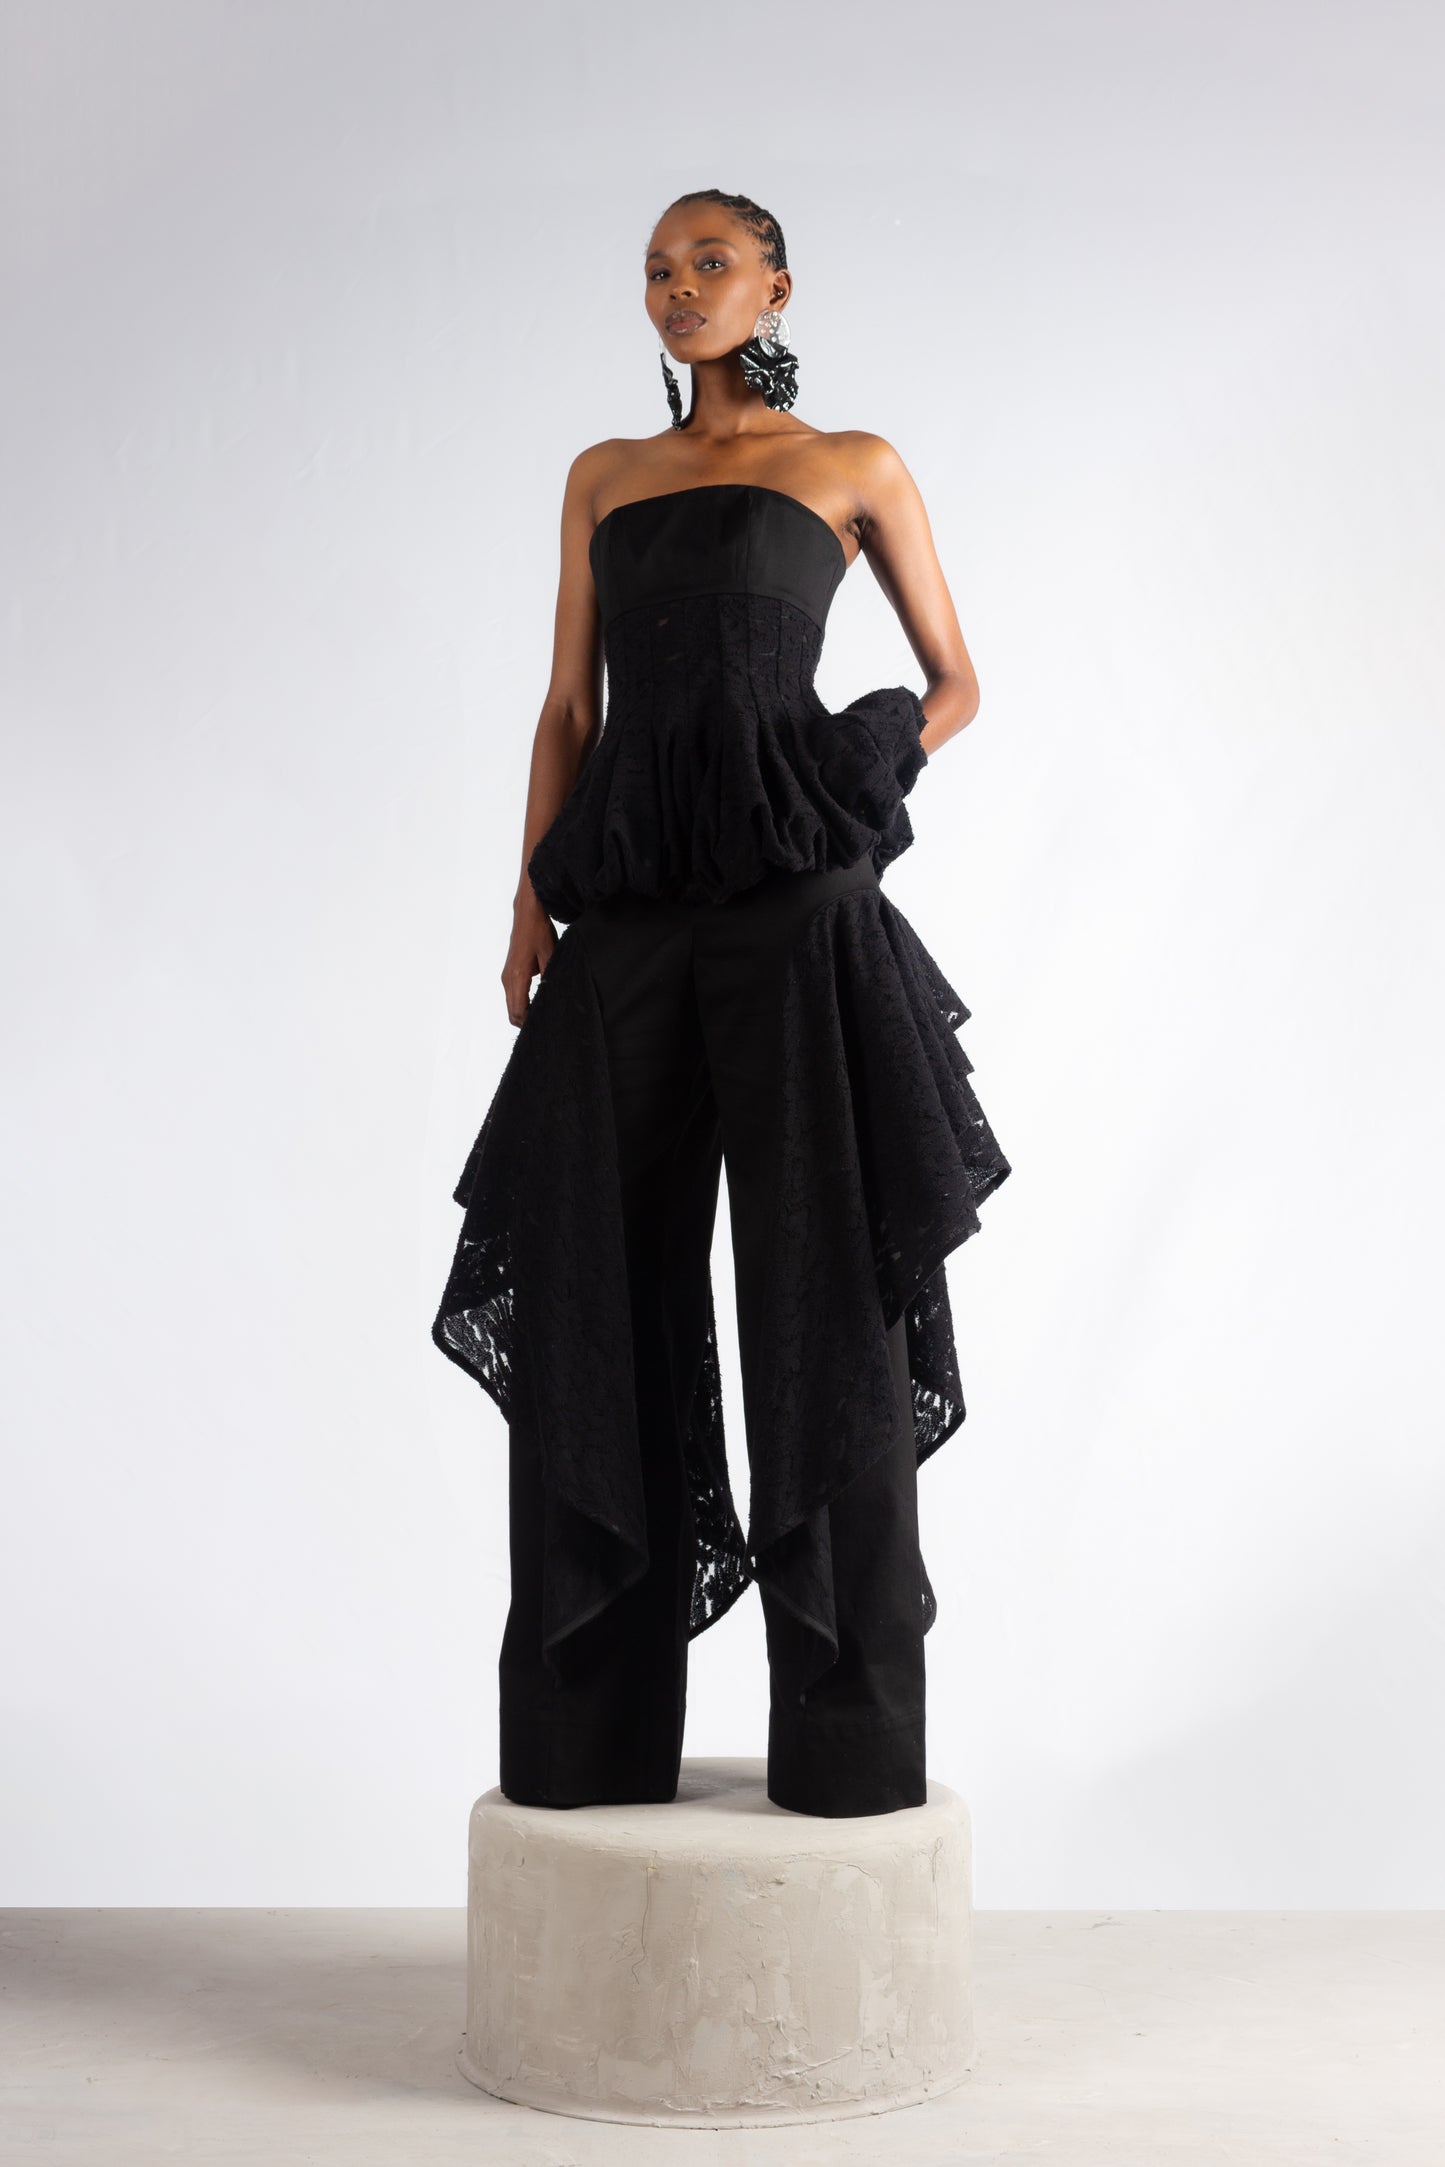 The Diffusion Bustier